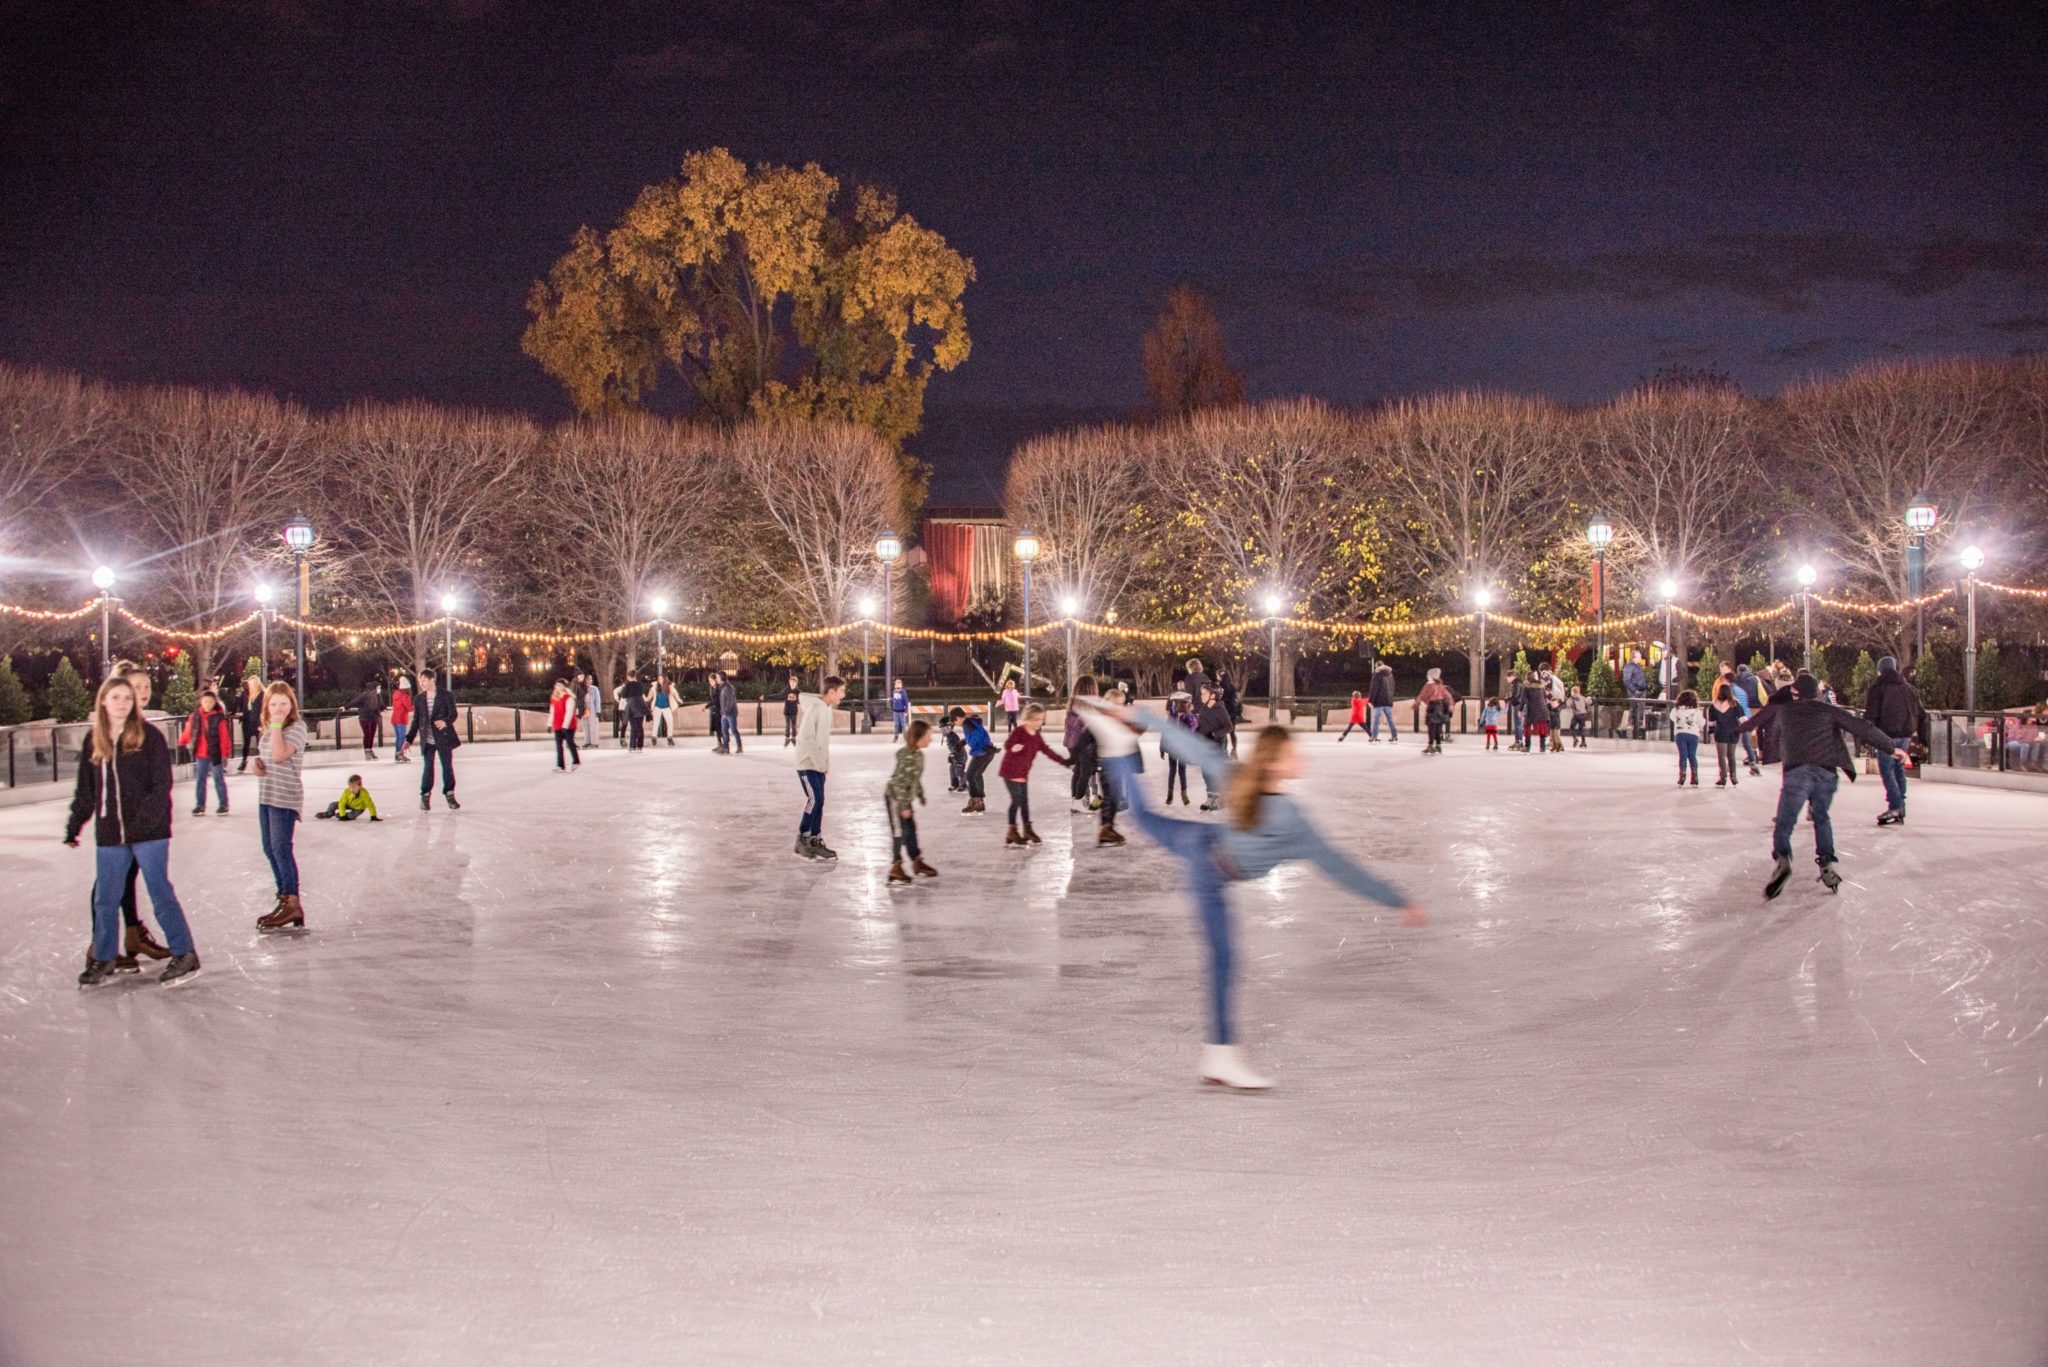 Ice Skating Returns to the National Gallery's Sculpture Garden on